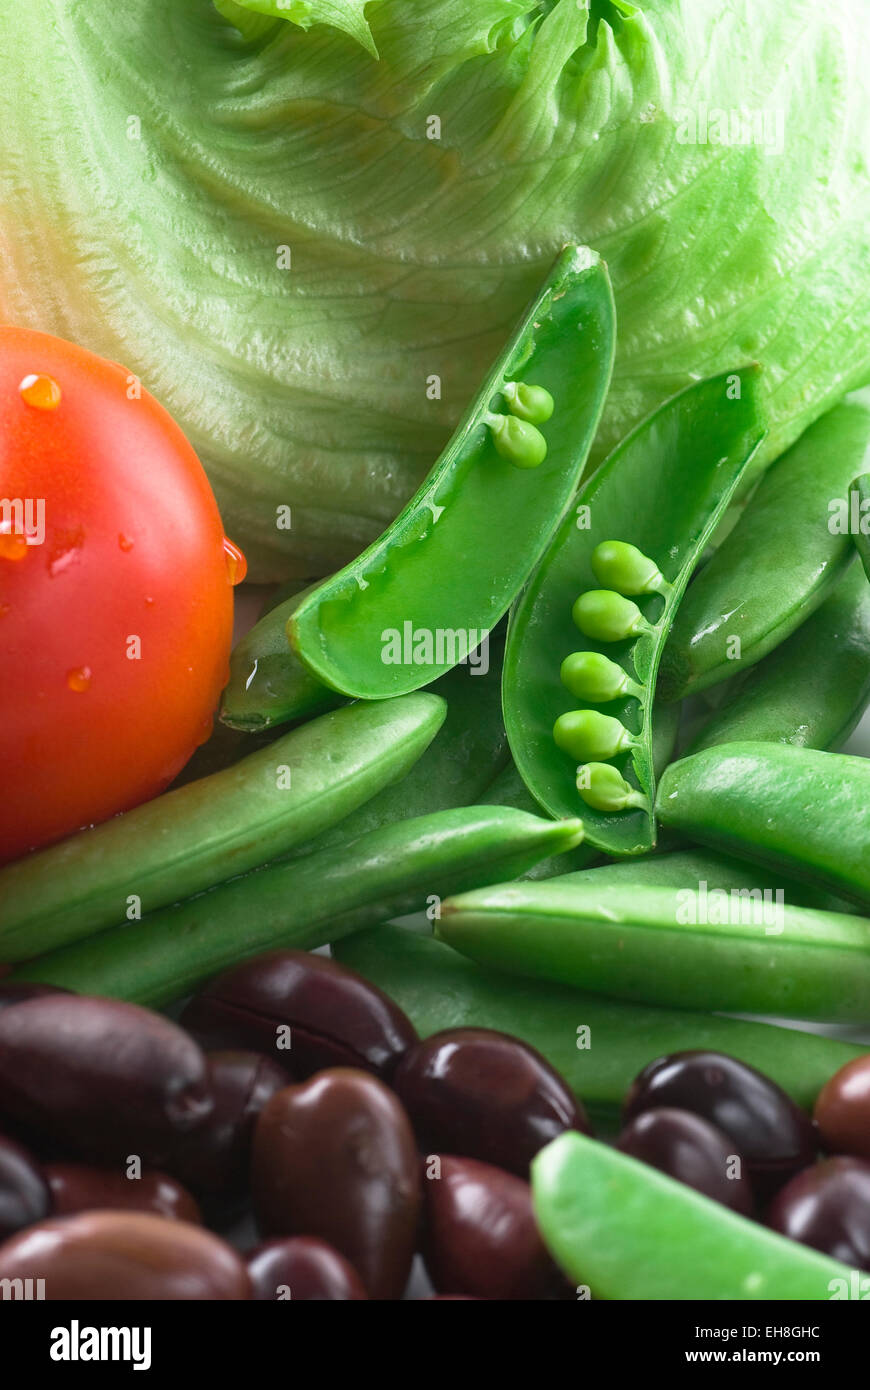 Salad ingredients. Sugar snaps, tomato, lettuce and black olives. Stock Photo